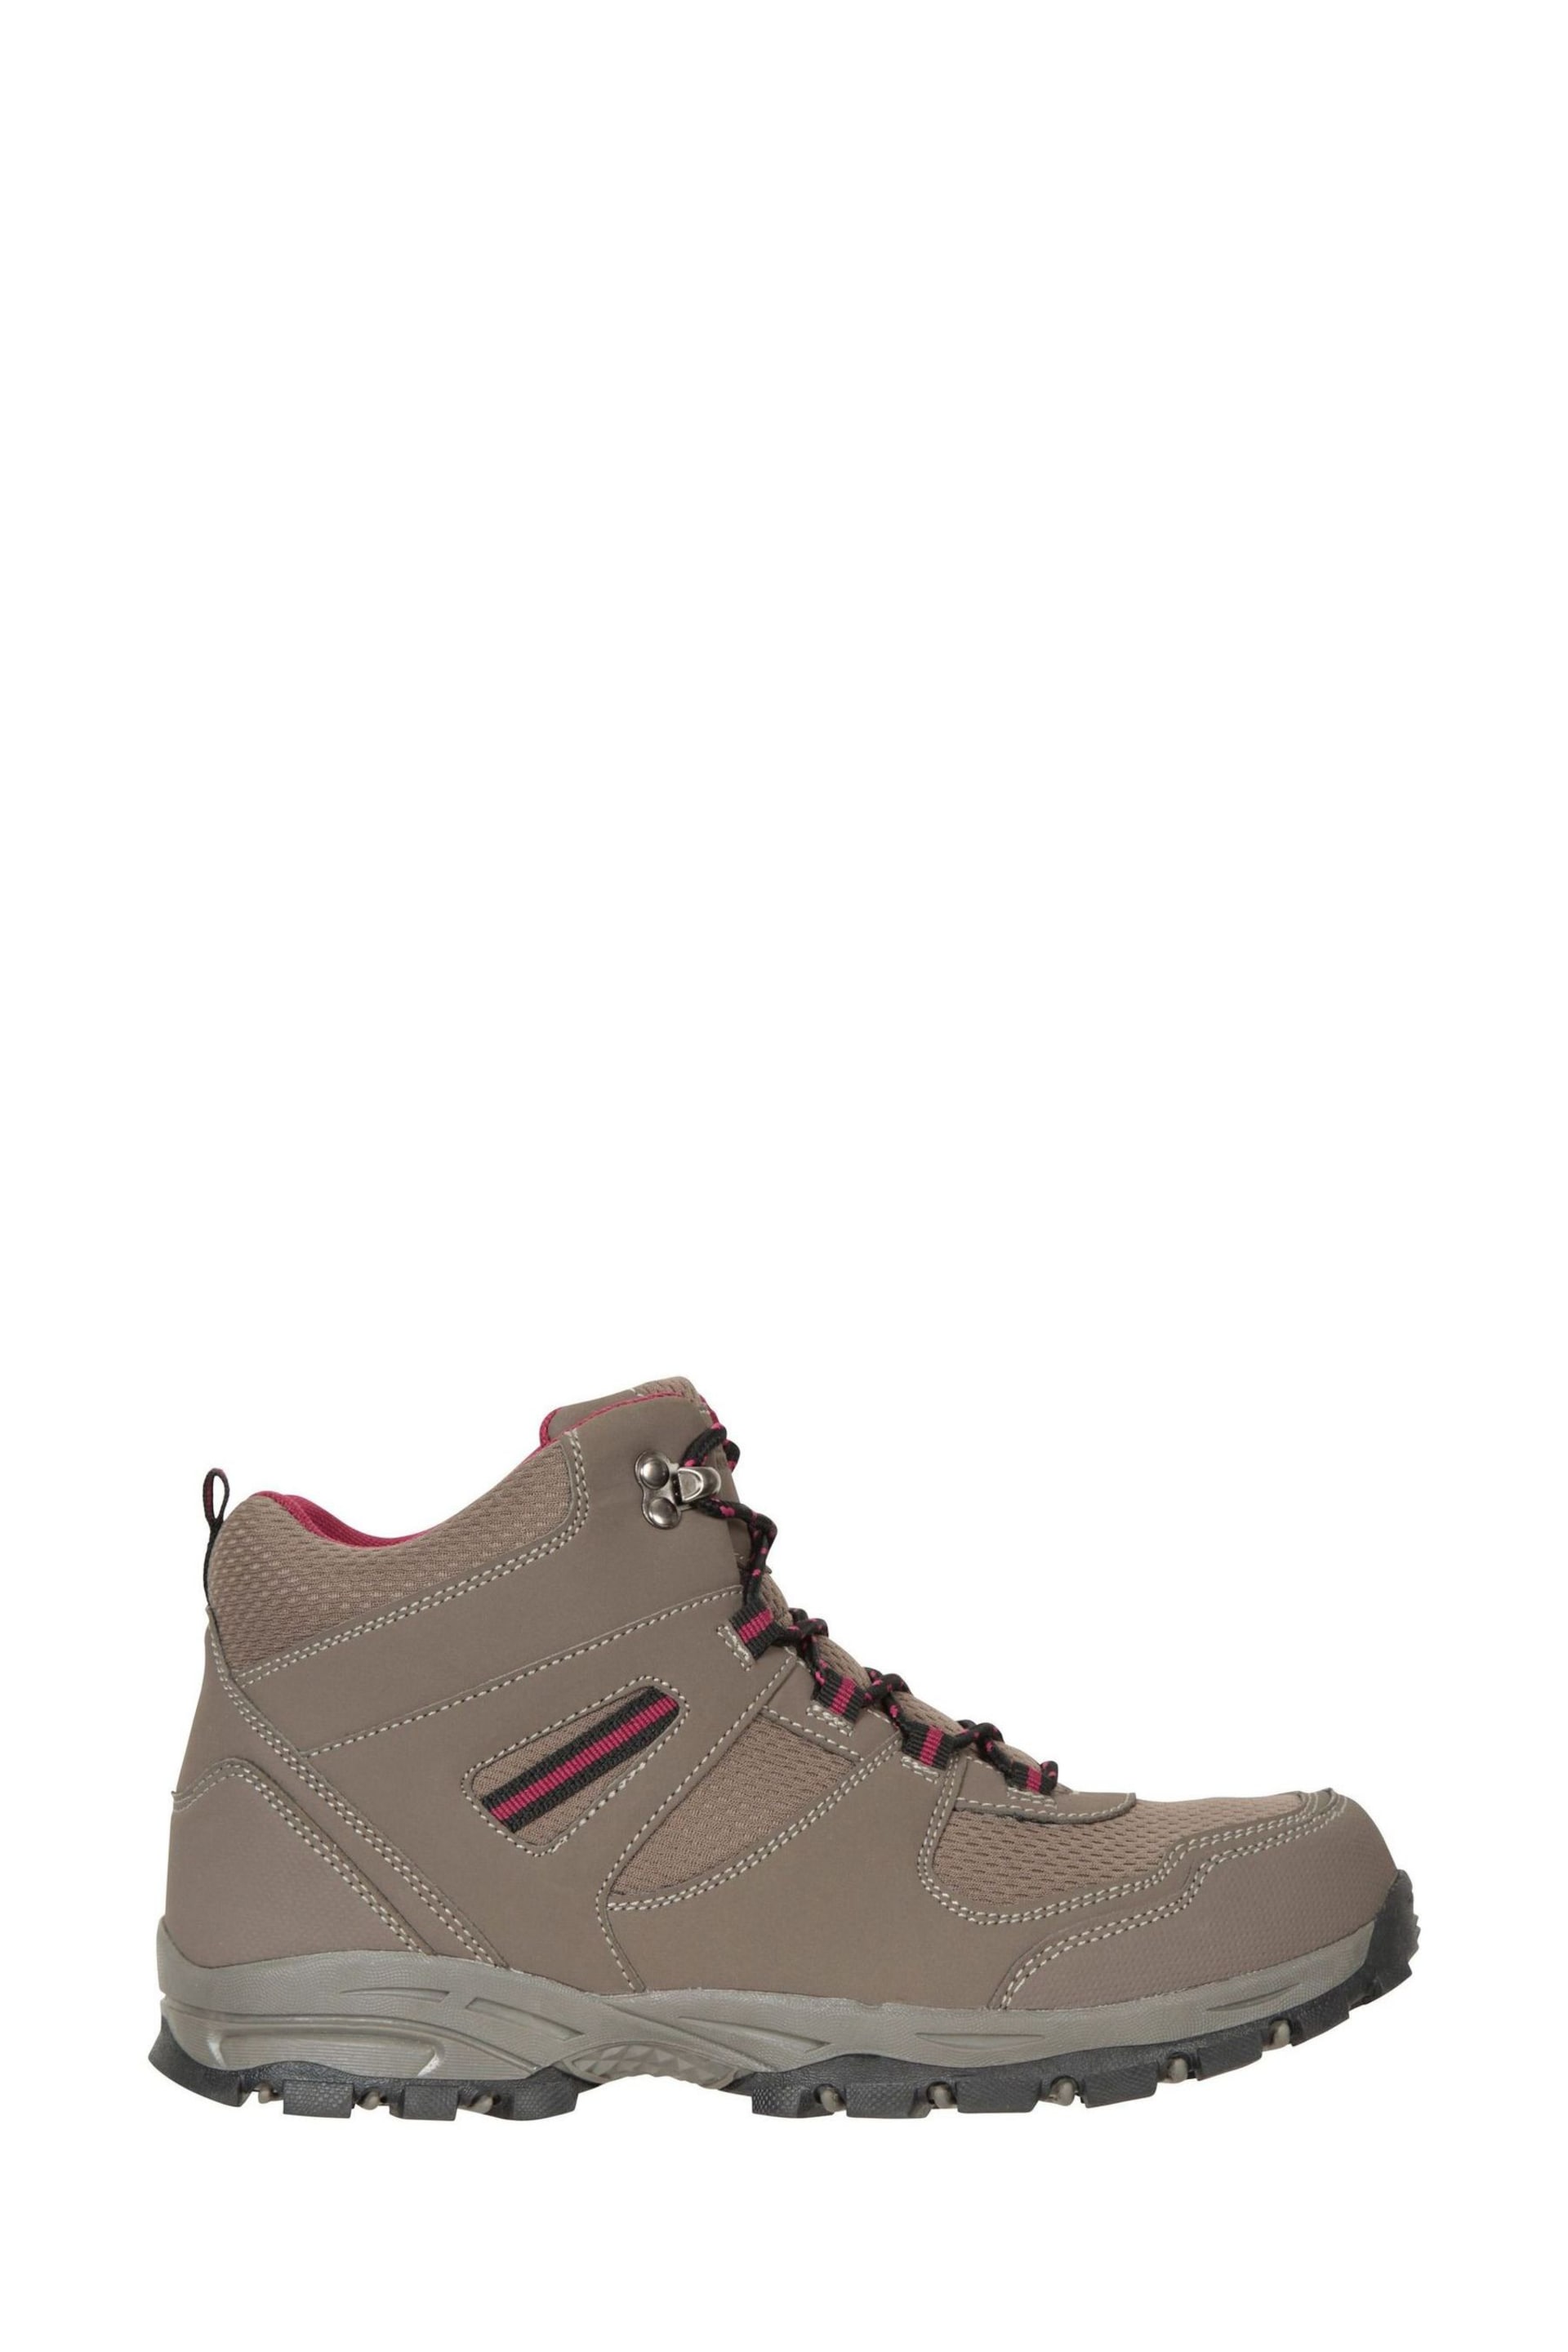 Mountain Warehouse Brown Wide Fit Womens Mcleod Boots - Image 2 of 4